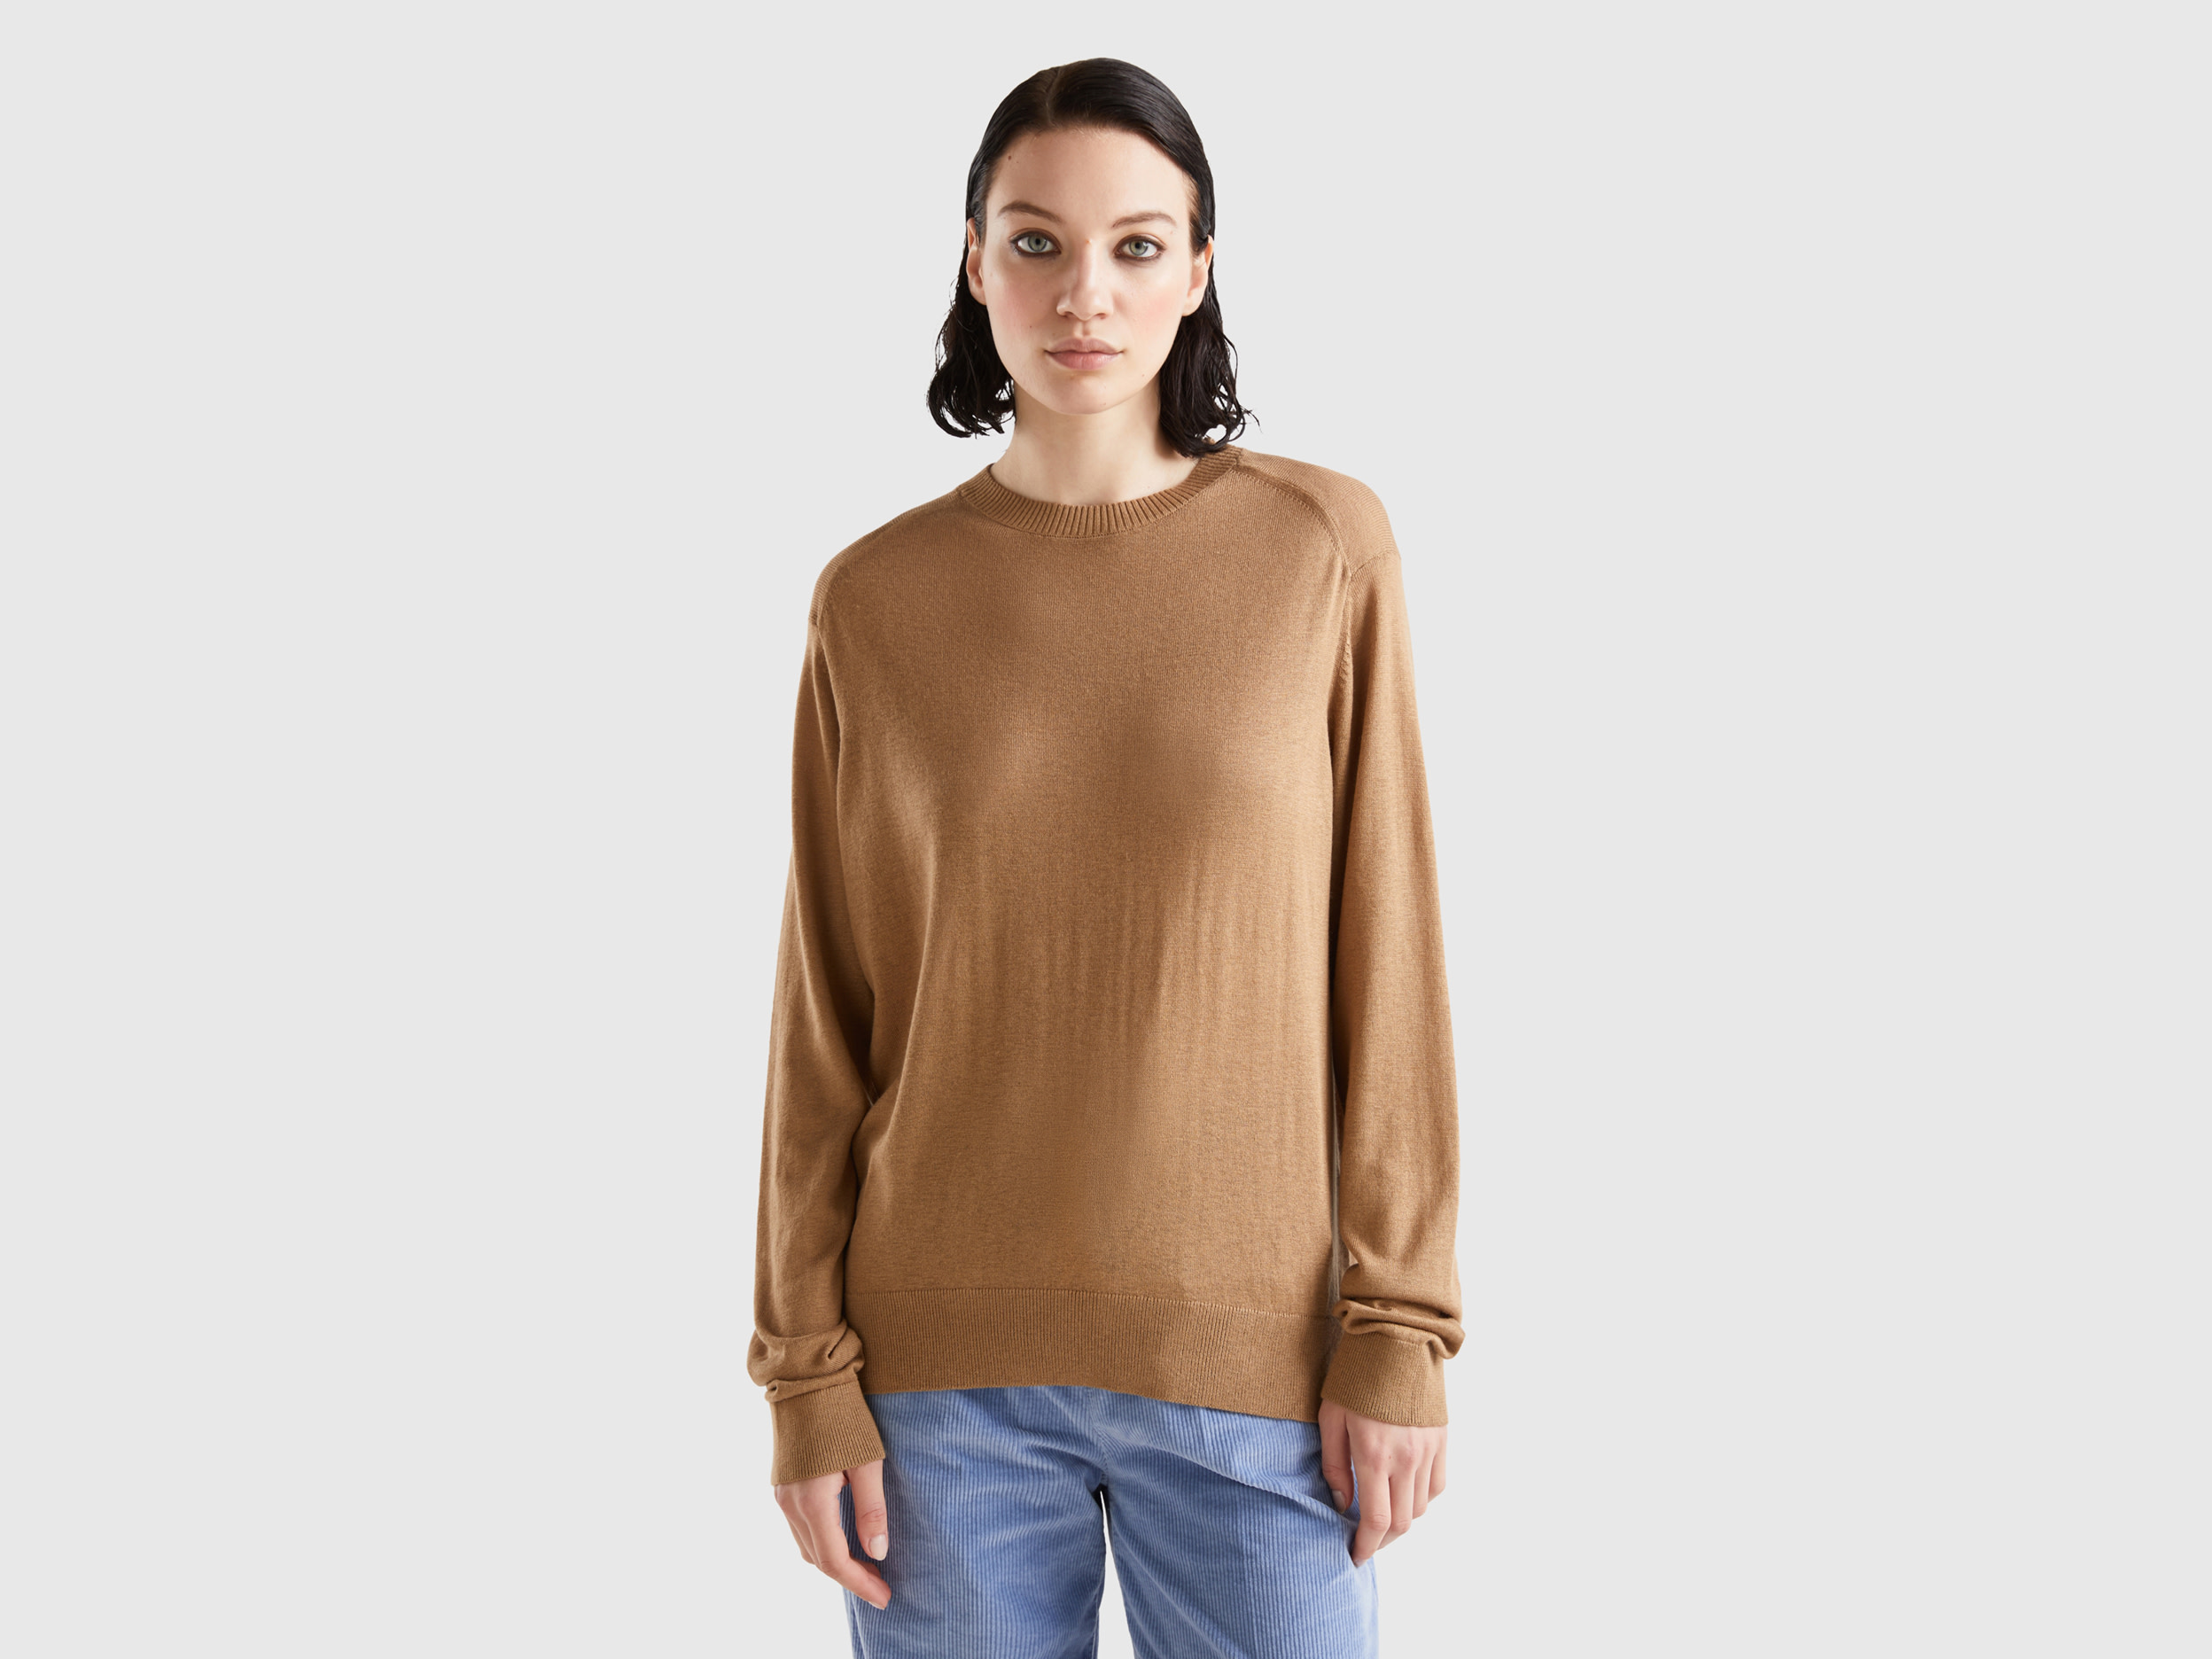 Benetton, Sweater In Viscose Blend With Slits, size S, Camel, Women